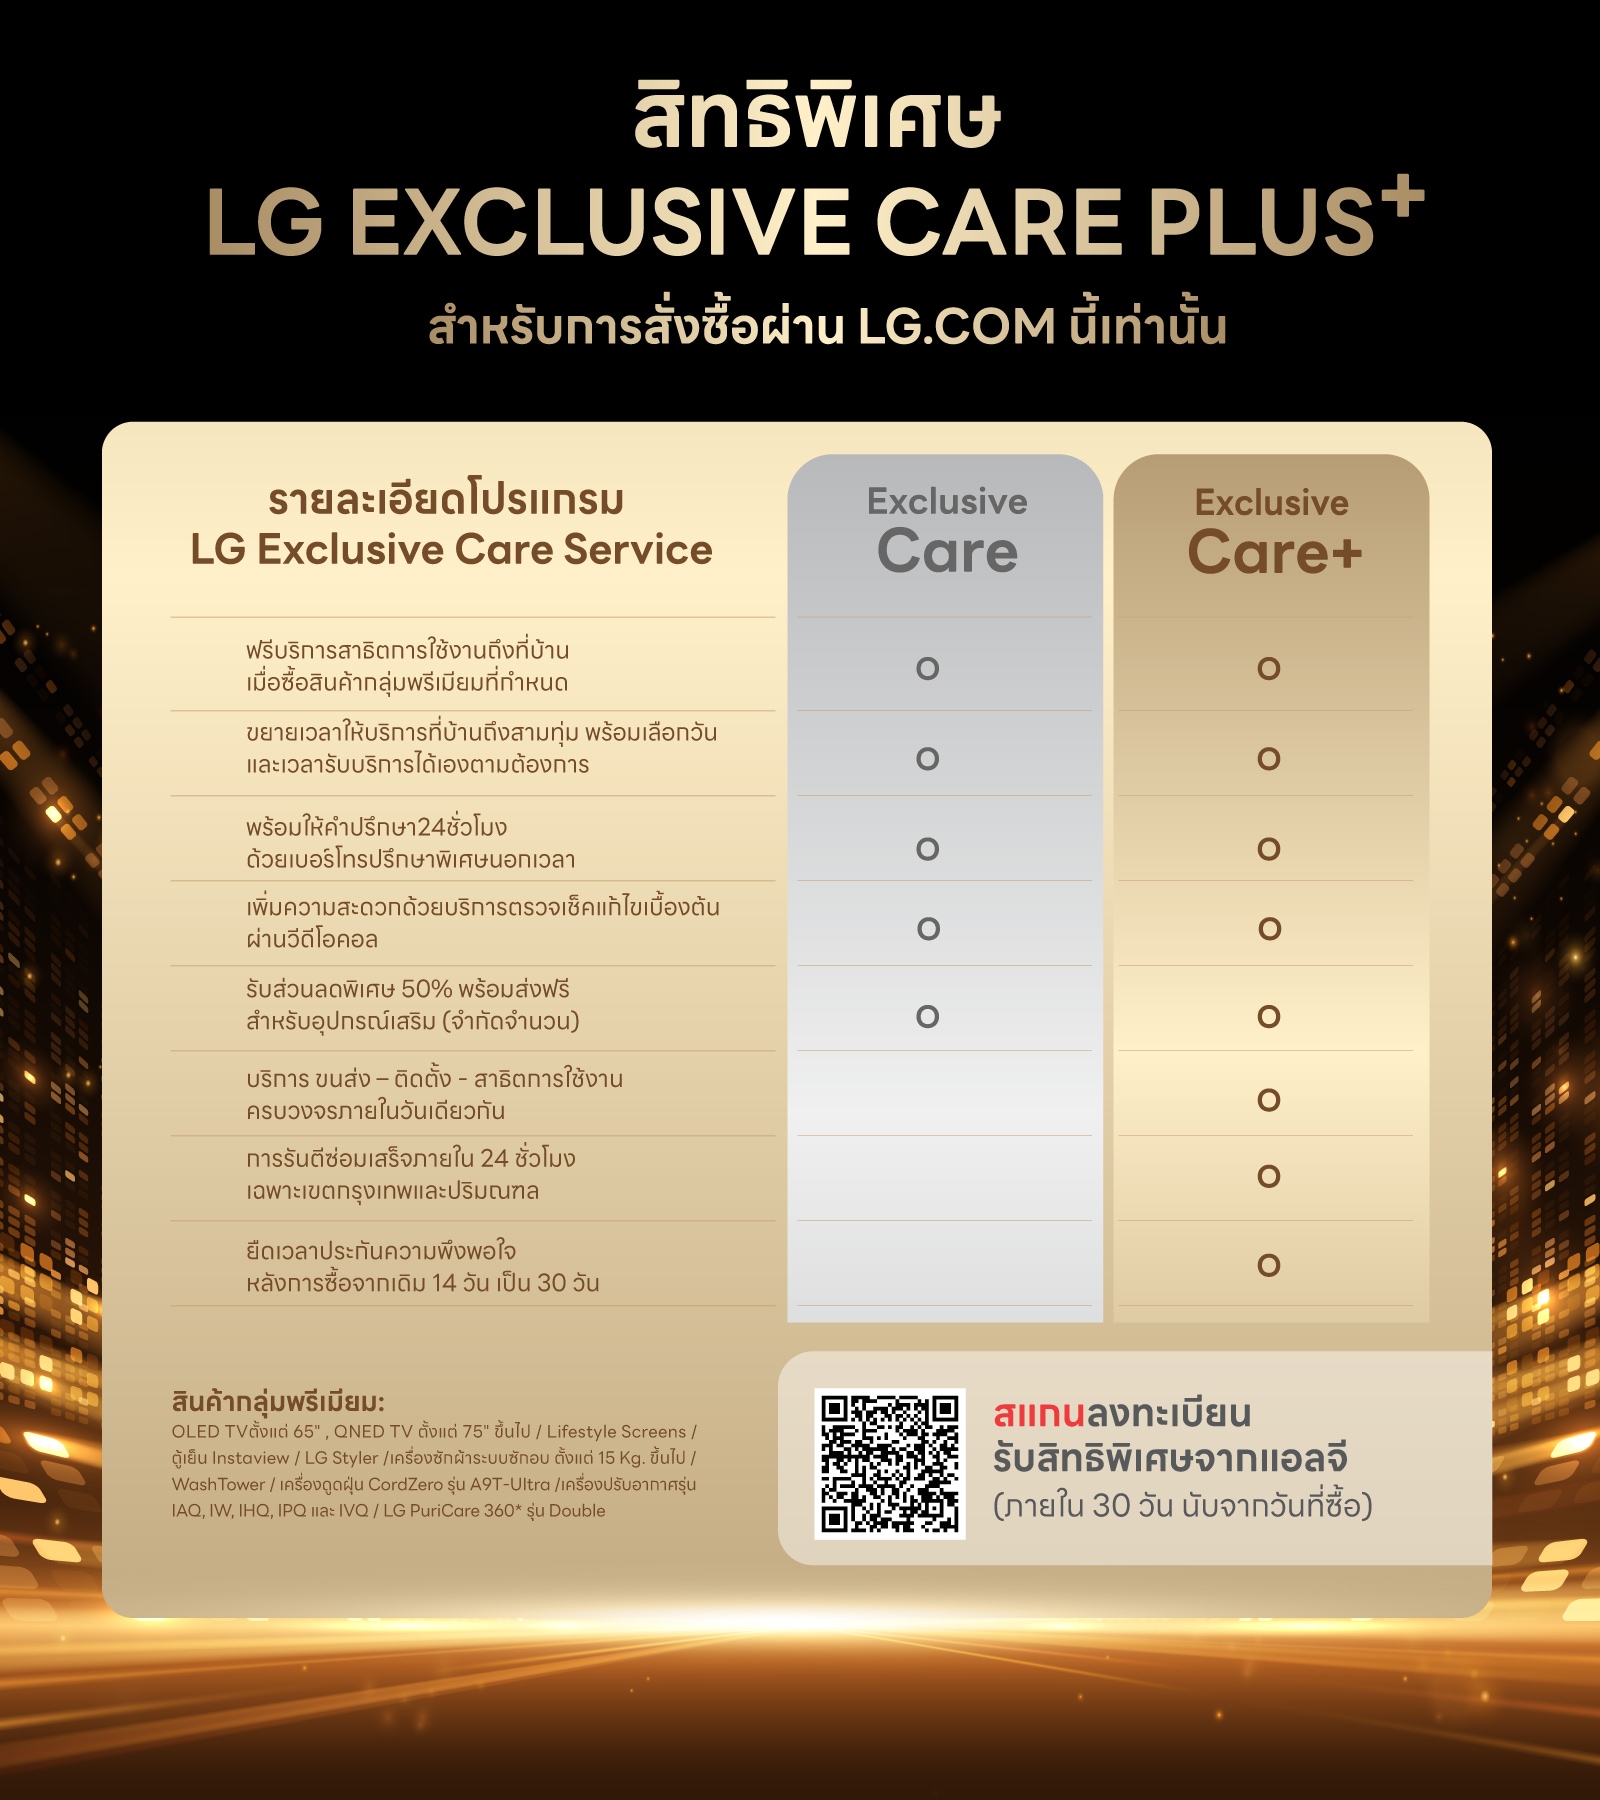 LG Exclusive Care